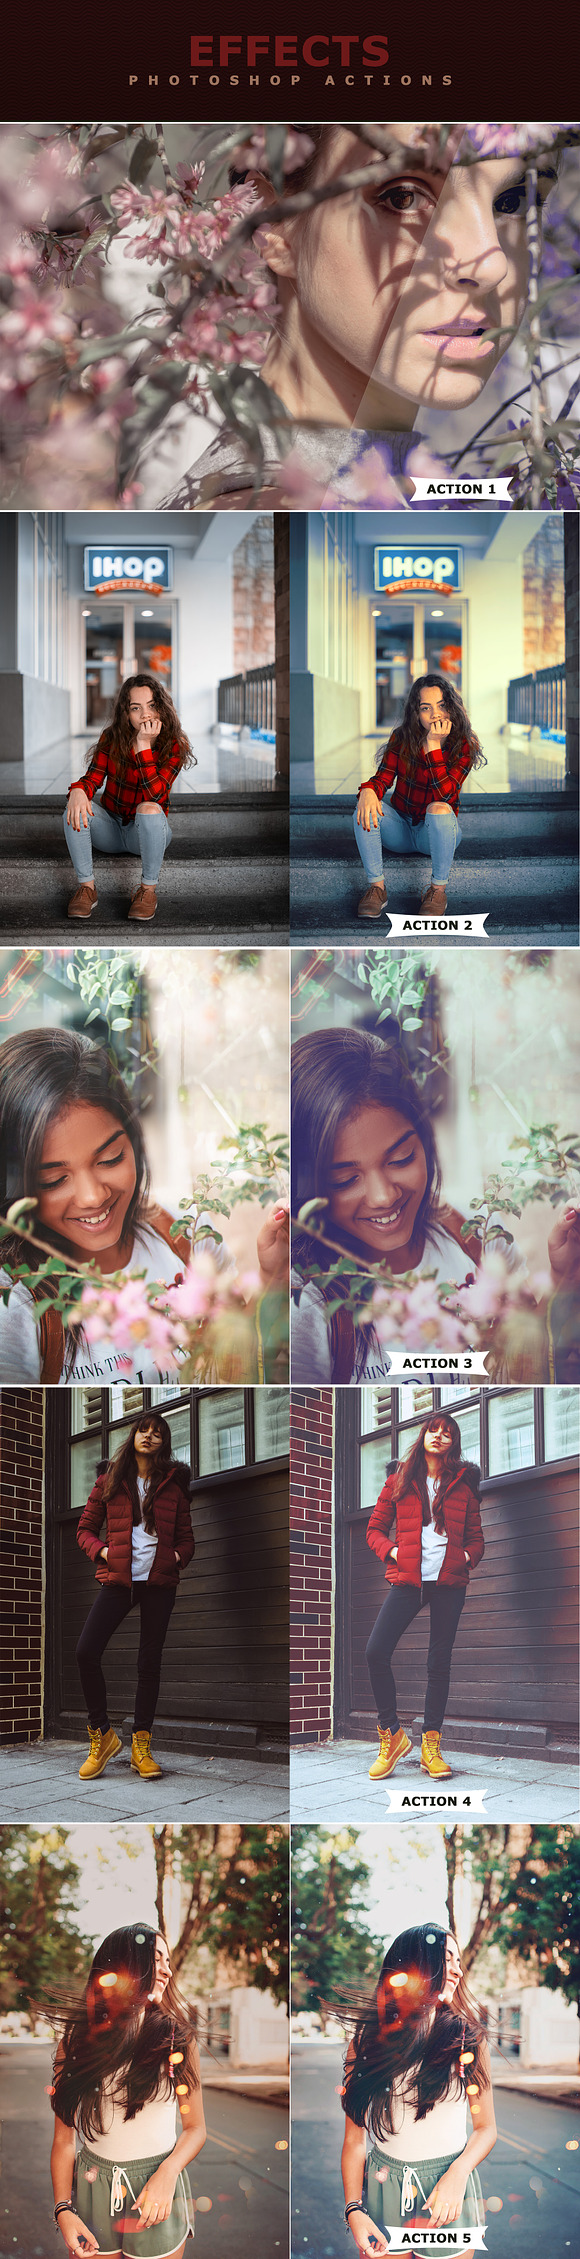 Effects Photoshop Actions in Add-Ons - product preview 1